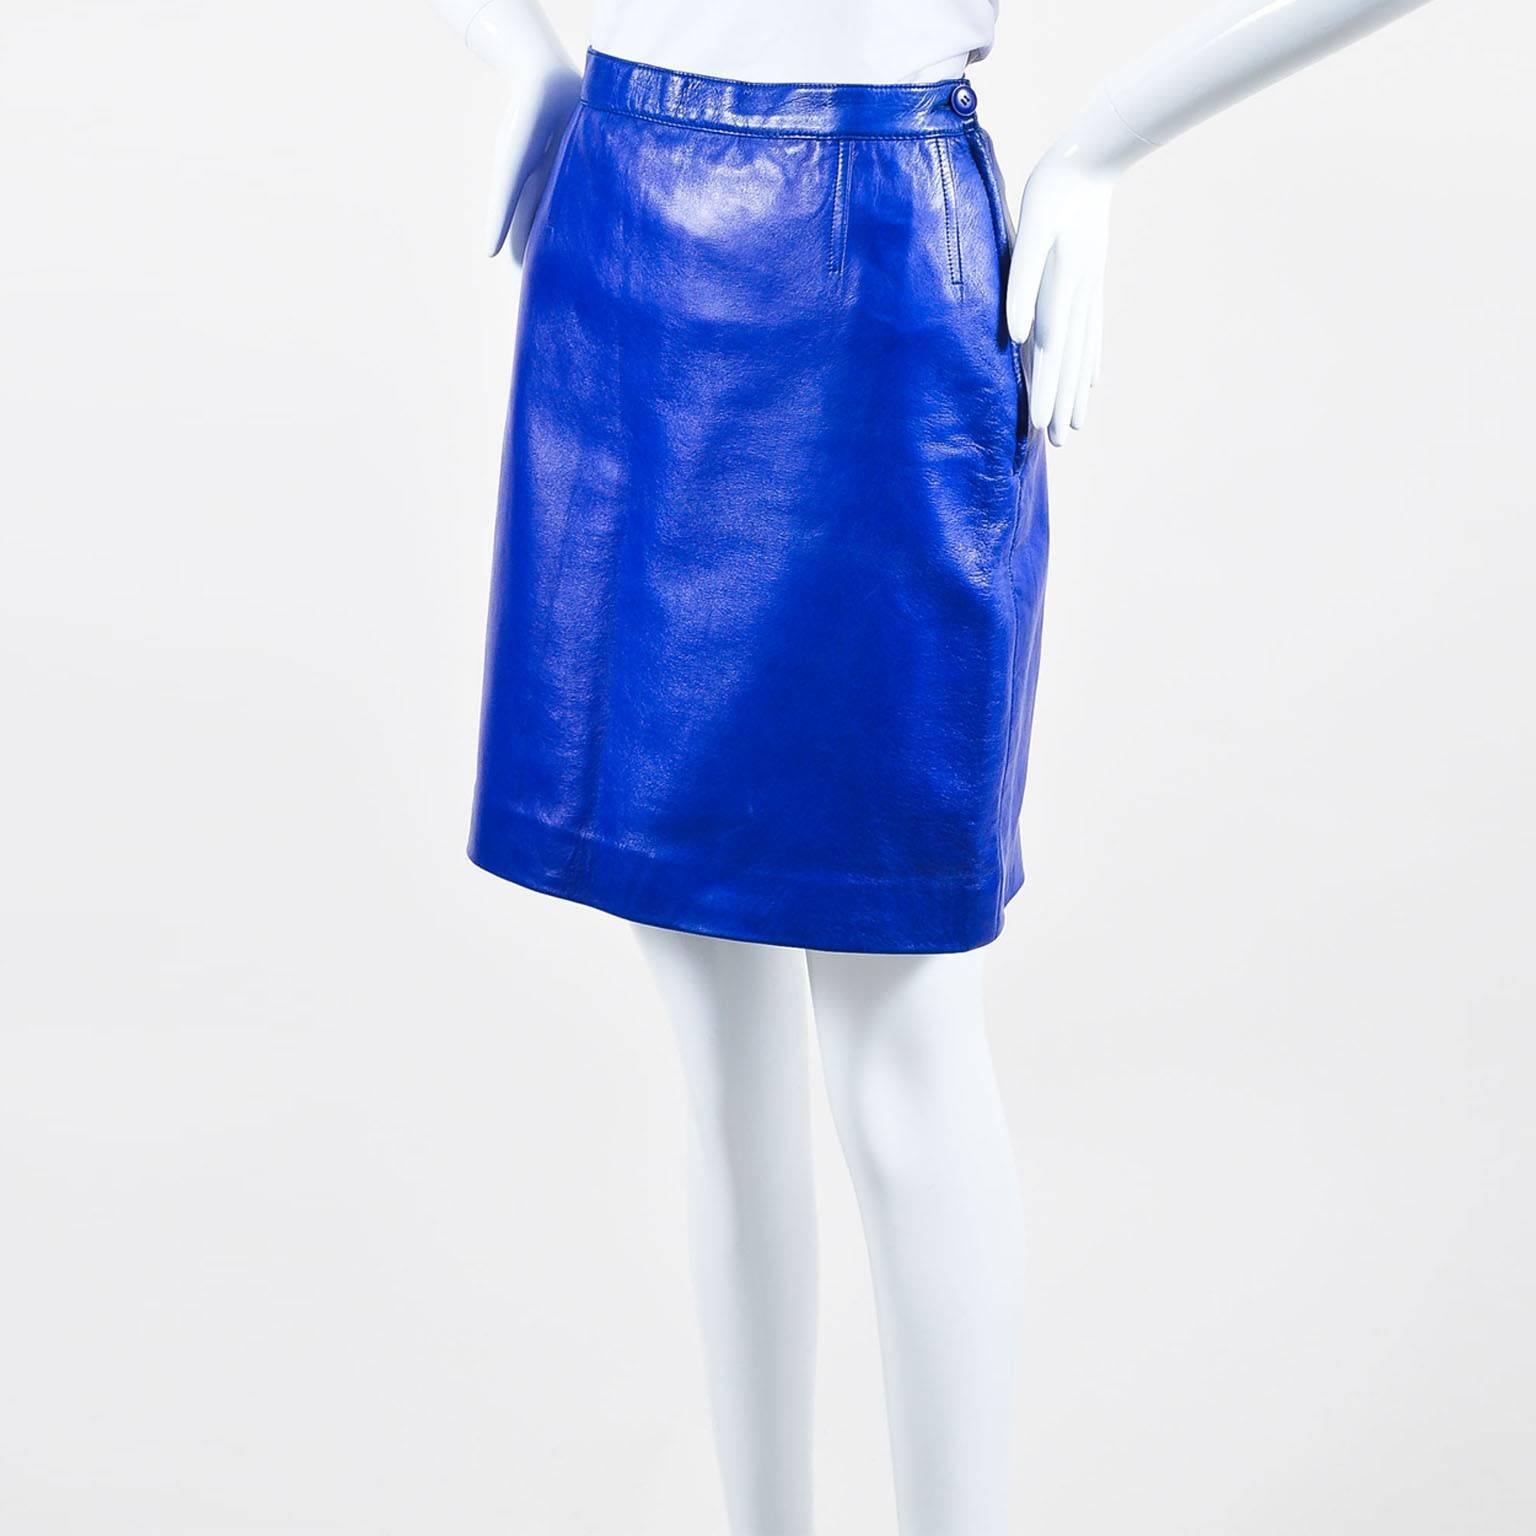 Bold pencil skirt that can transition from day to night. Supple leather construction. Hits above knees. Side button closure. Hidden side zip closure. Lined.

